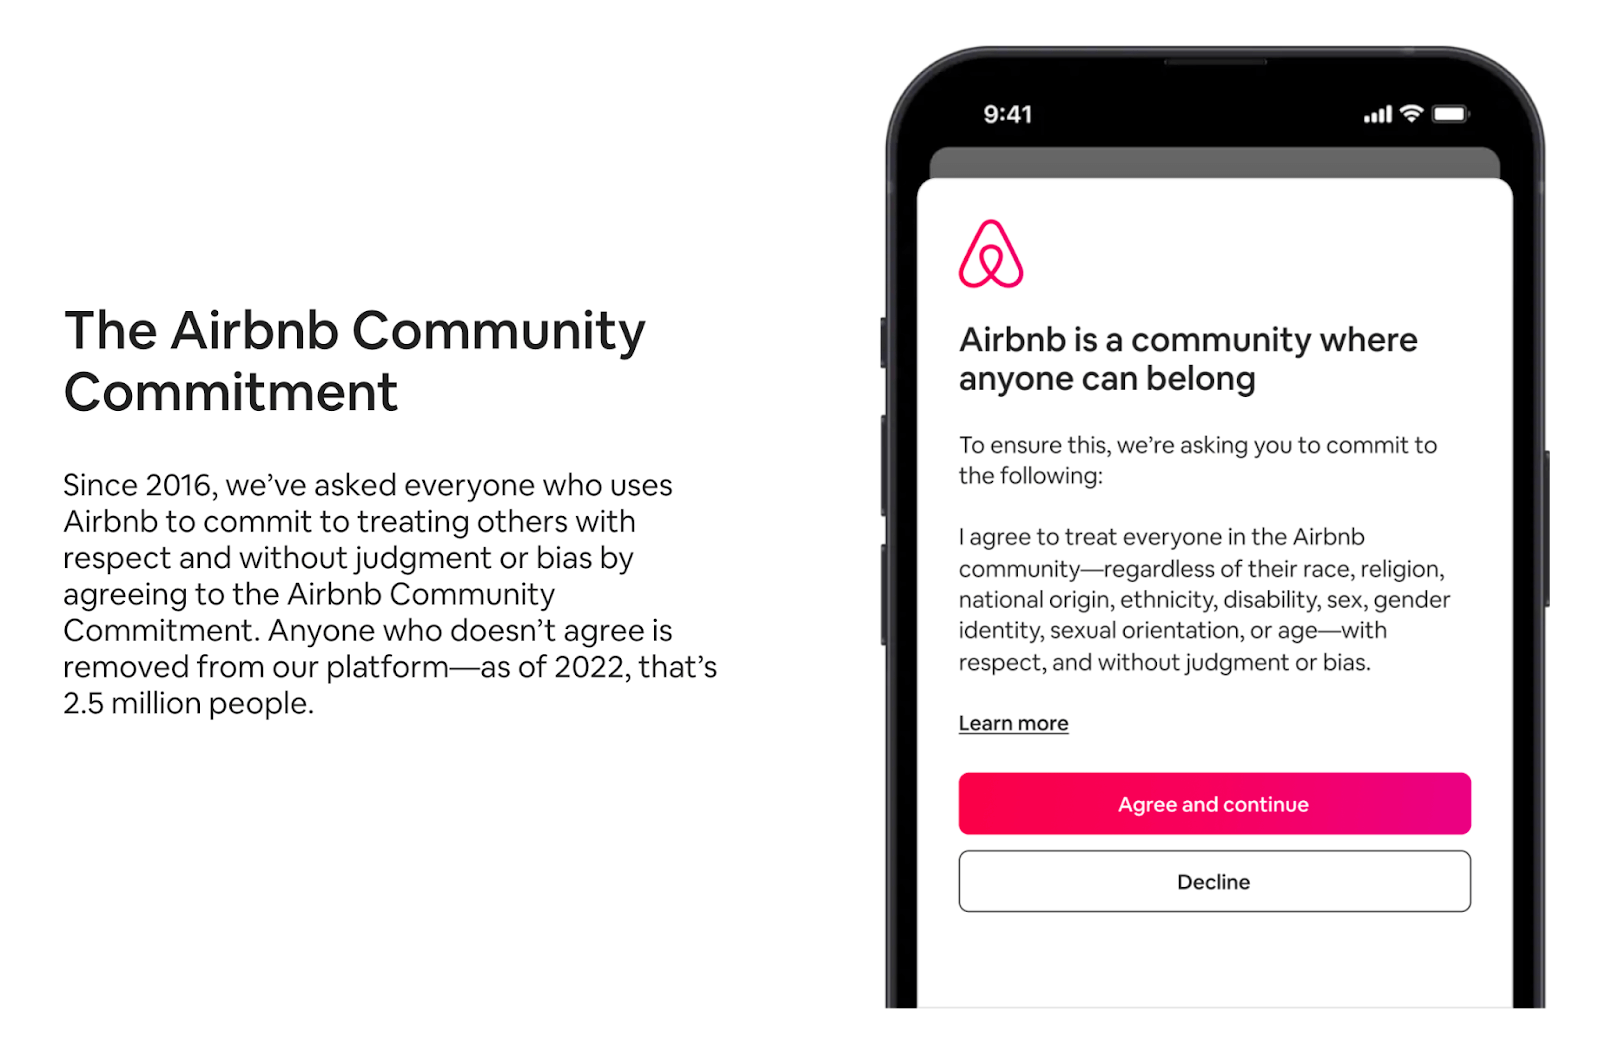 Airbnb's Community Commitment via the Project Lighthouse